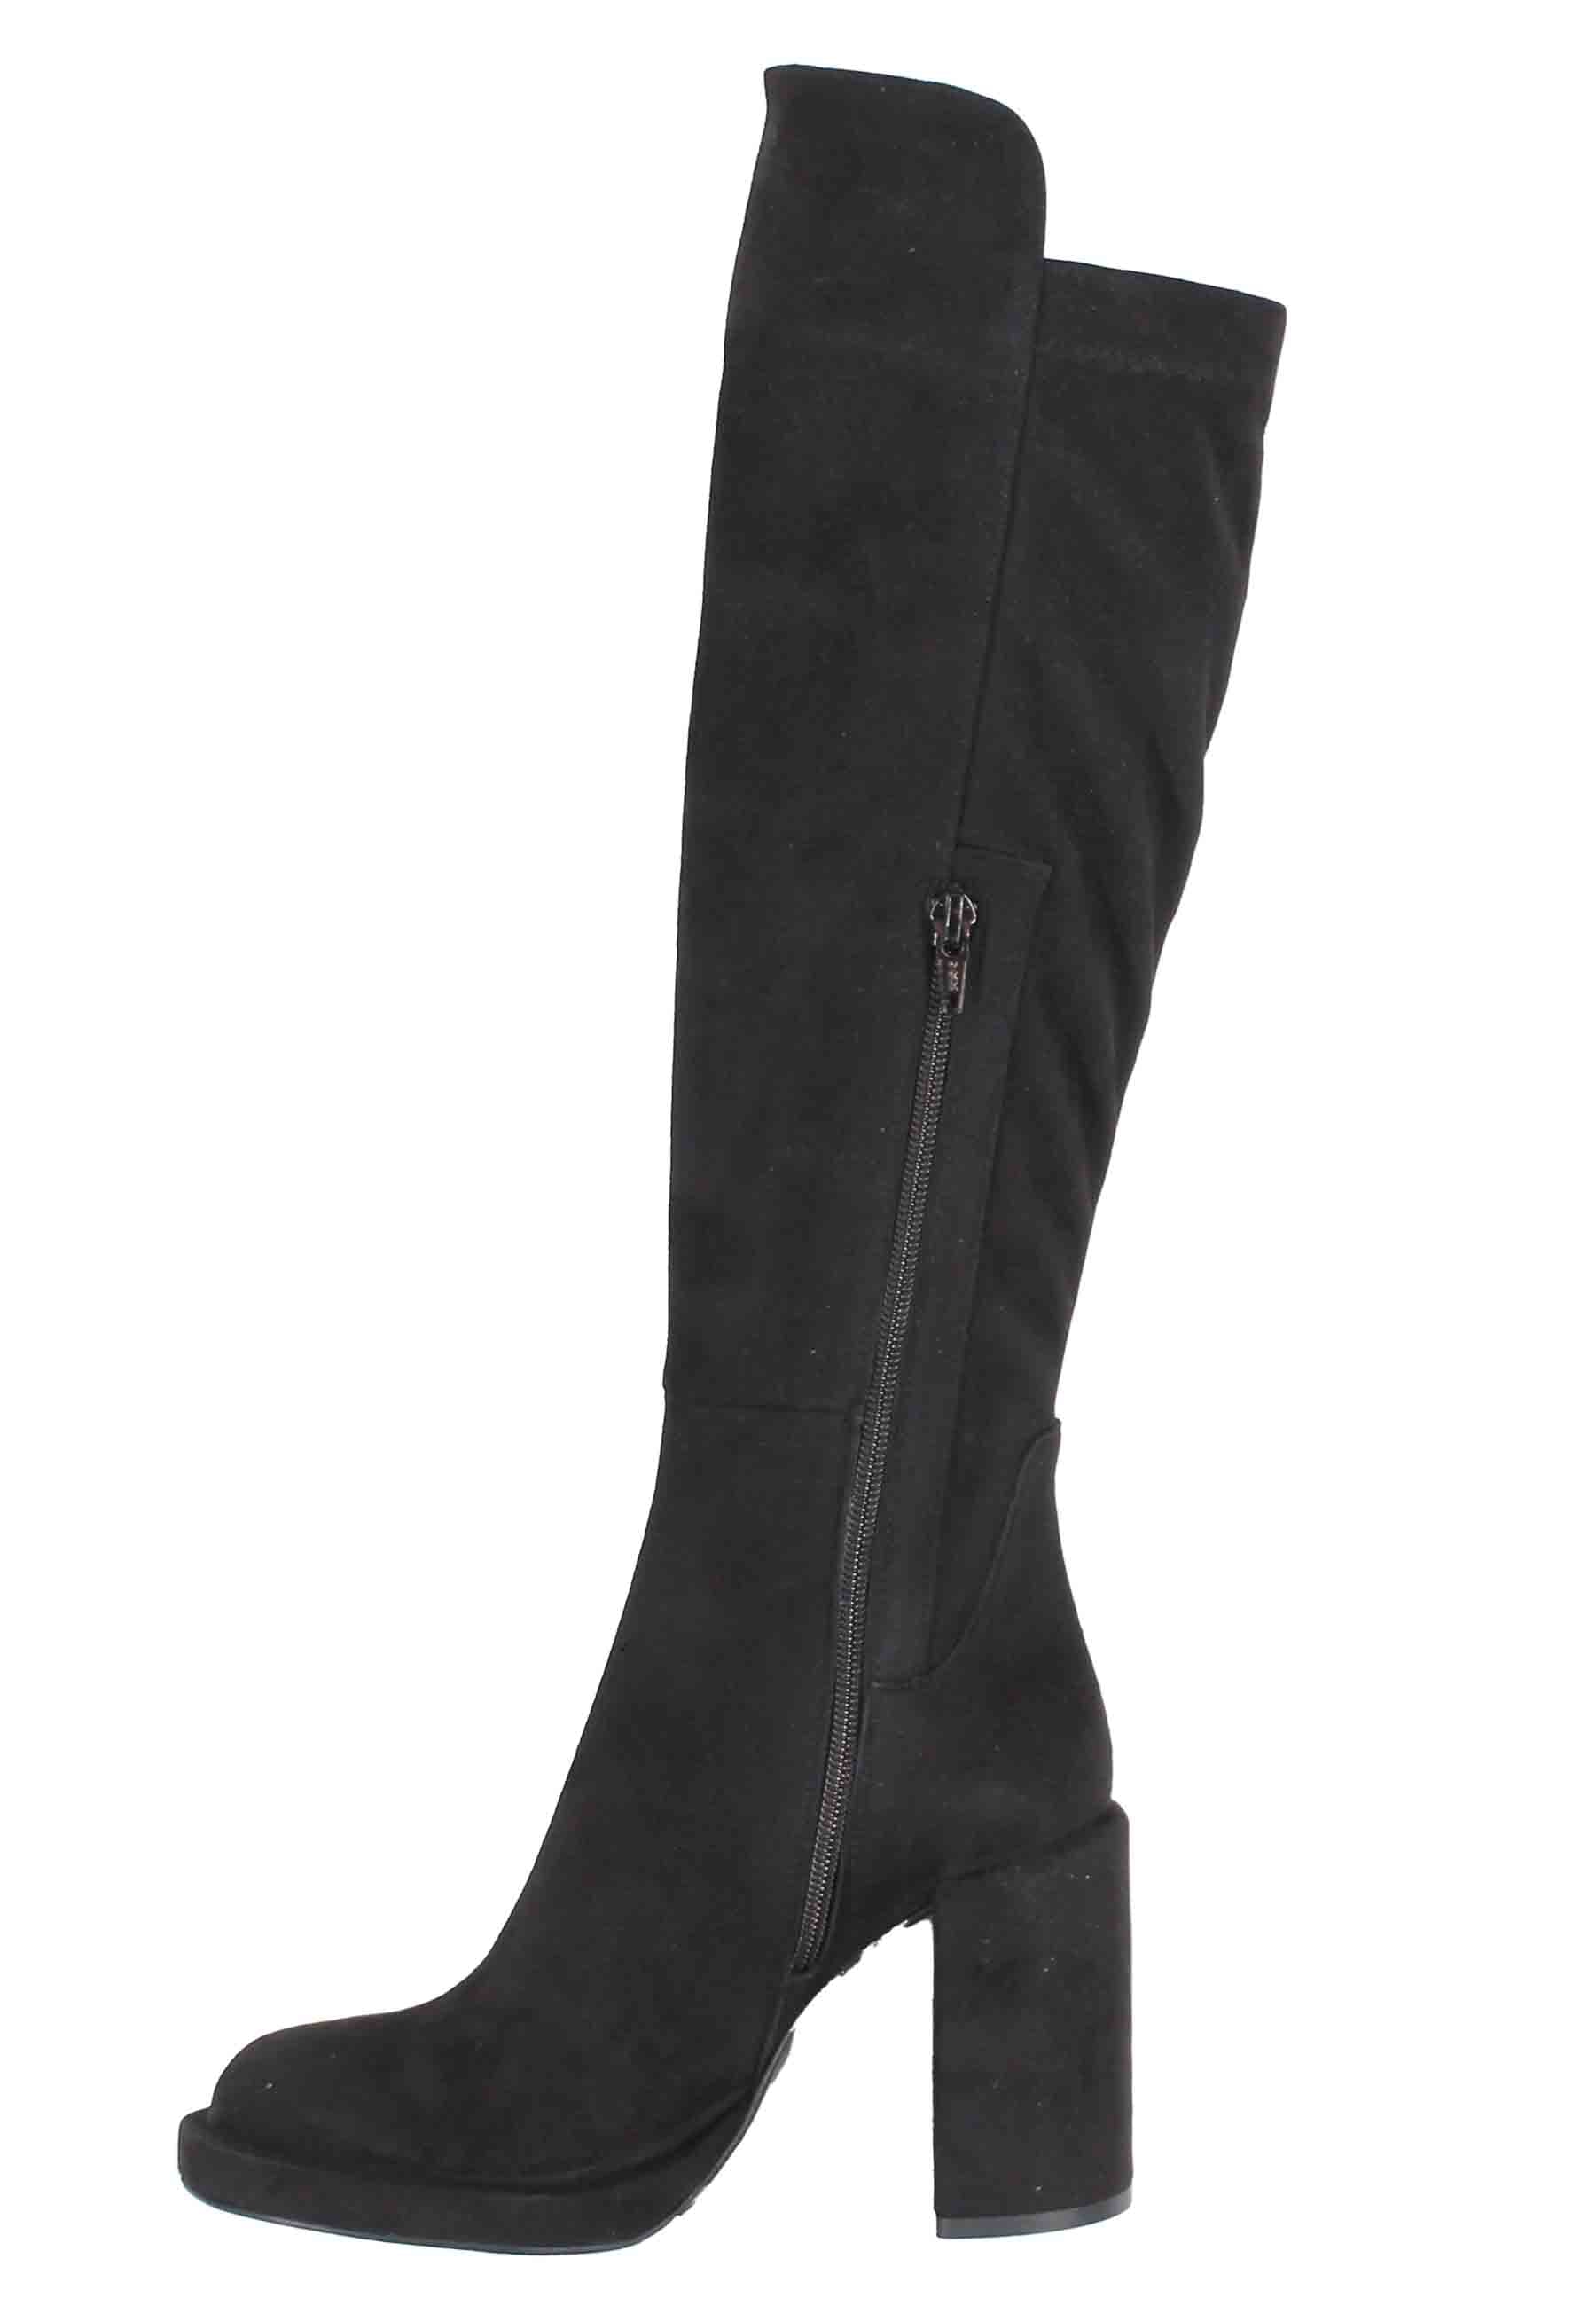 Women's boots in black eco suede with high heels